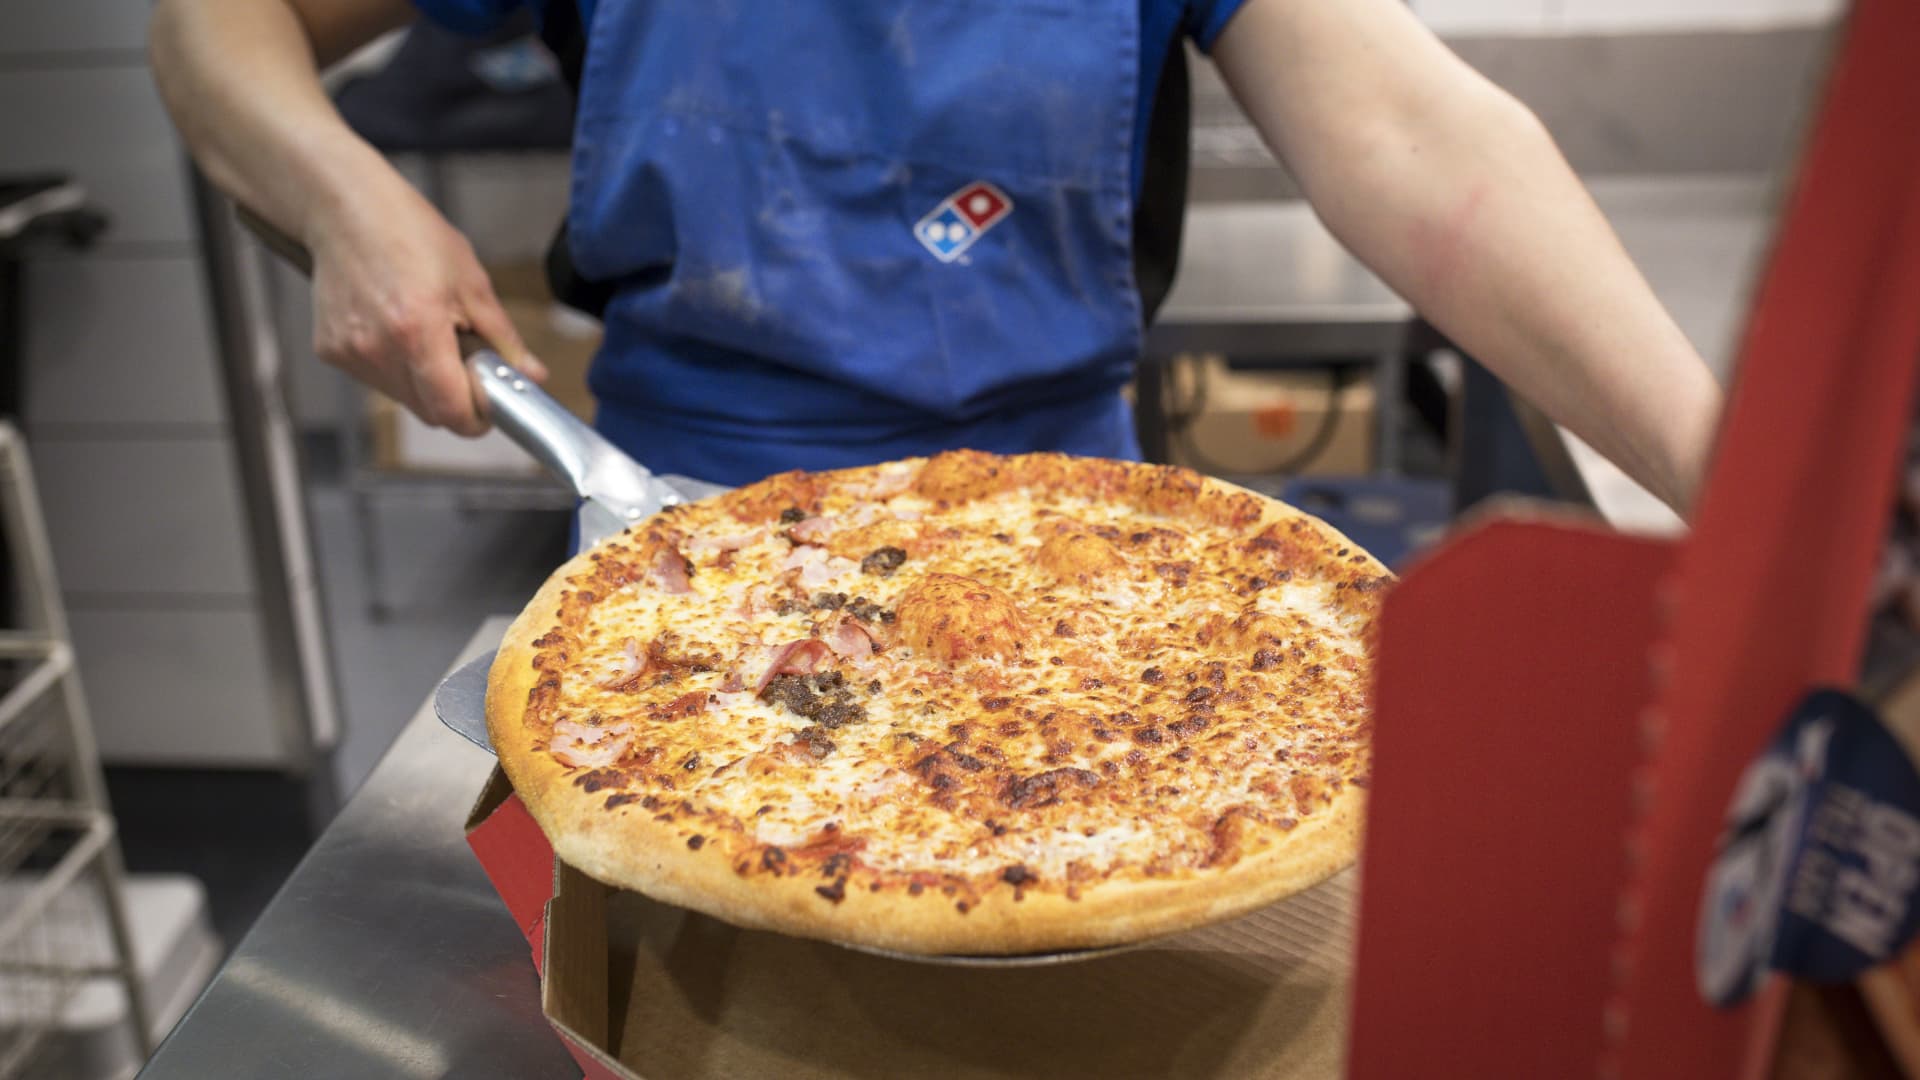 Domino's earnings miss expectations as pizza chain cites tough labor market, higher costs